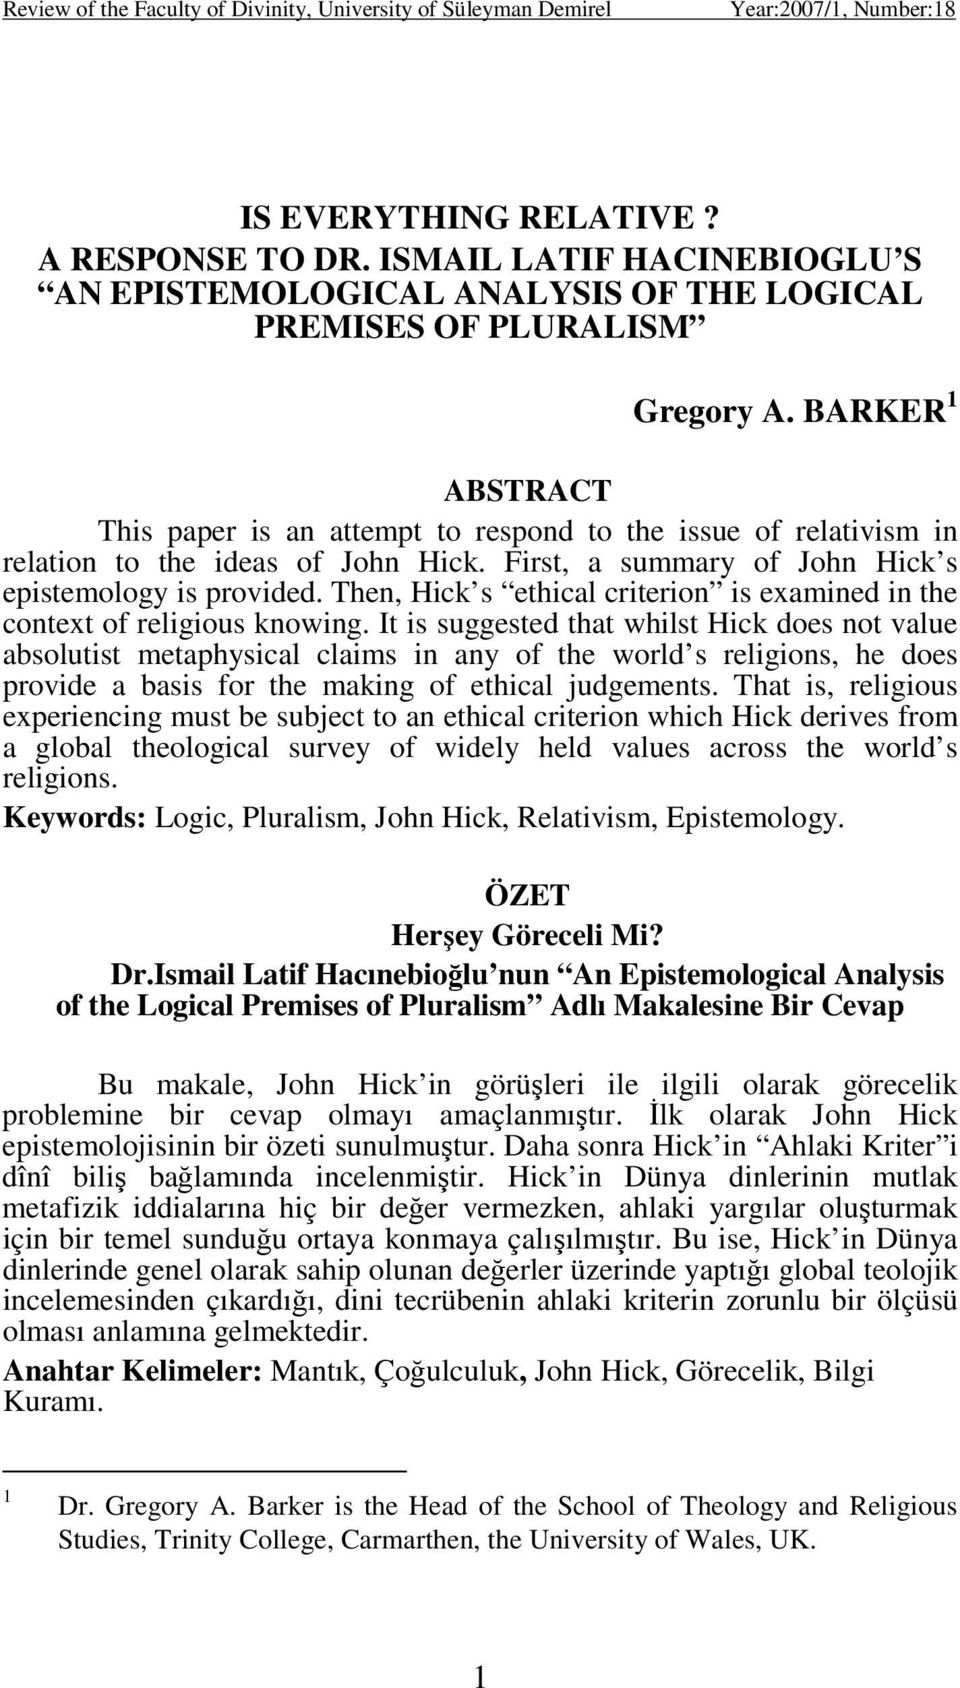 BARKER 1 ABSTRACT This paper is an attempt to respond to the issue of relativism in relation to the ideas of John Hick. First, a summary of John Hick s epistemology is provided.